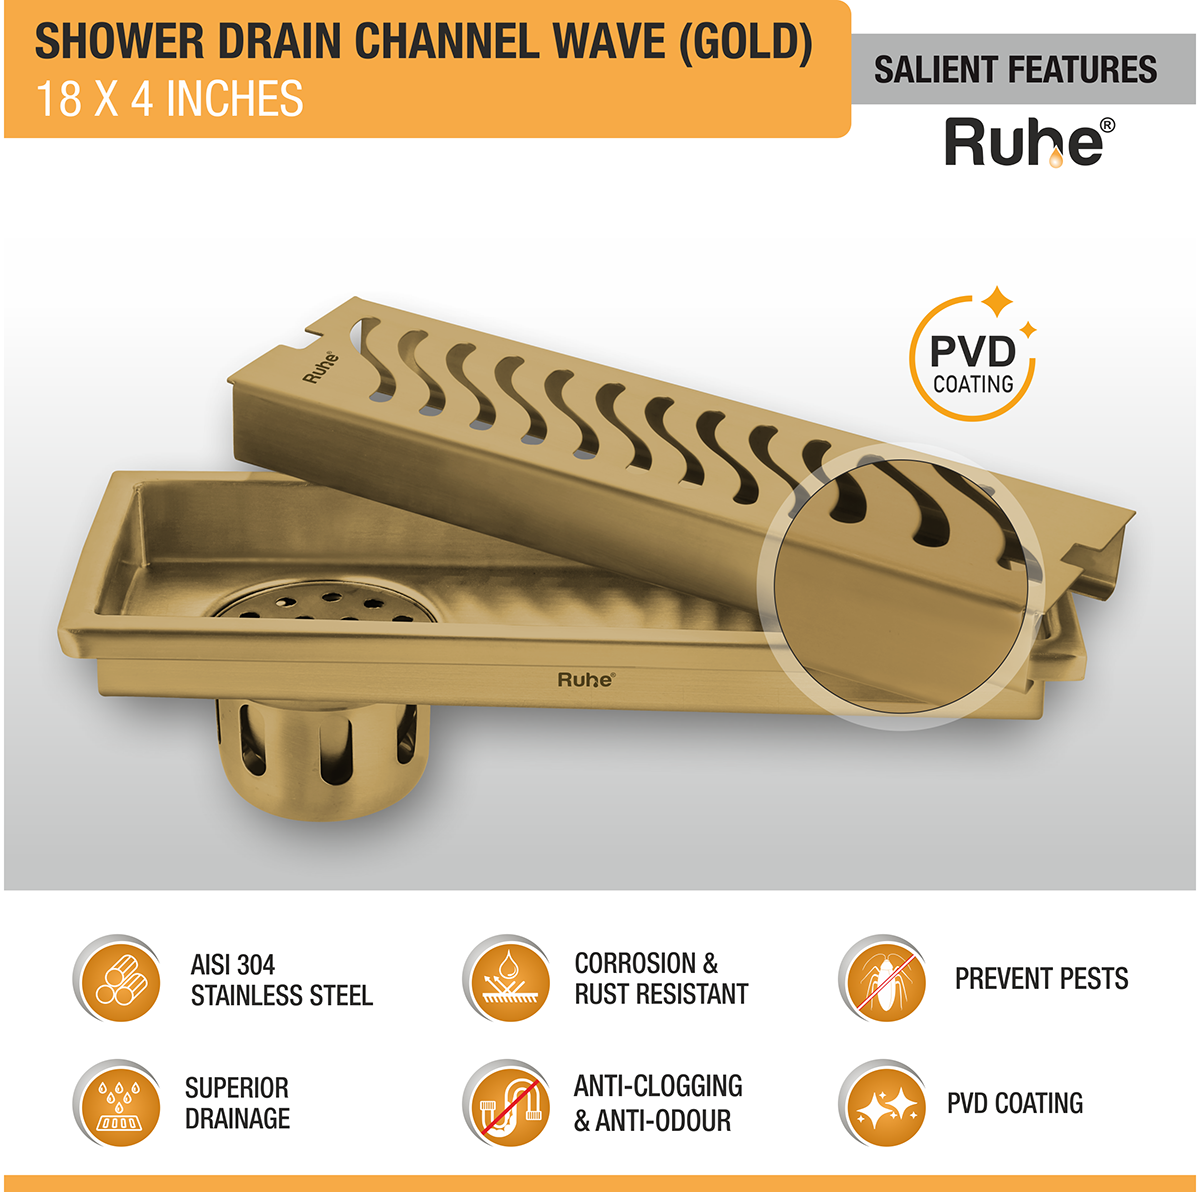 Wave Shower Drain Channel (18 x 4 Inches) YELLOW GOLD features